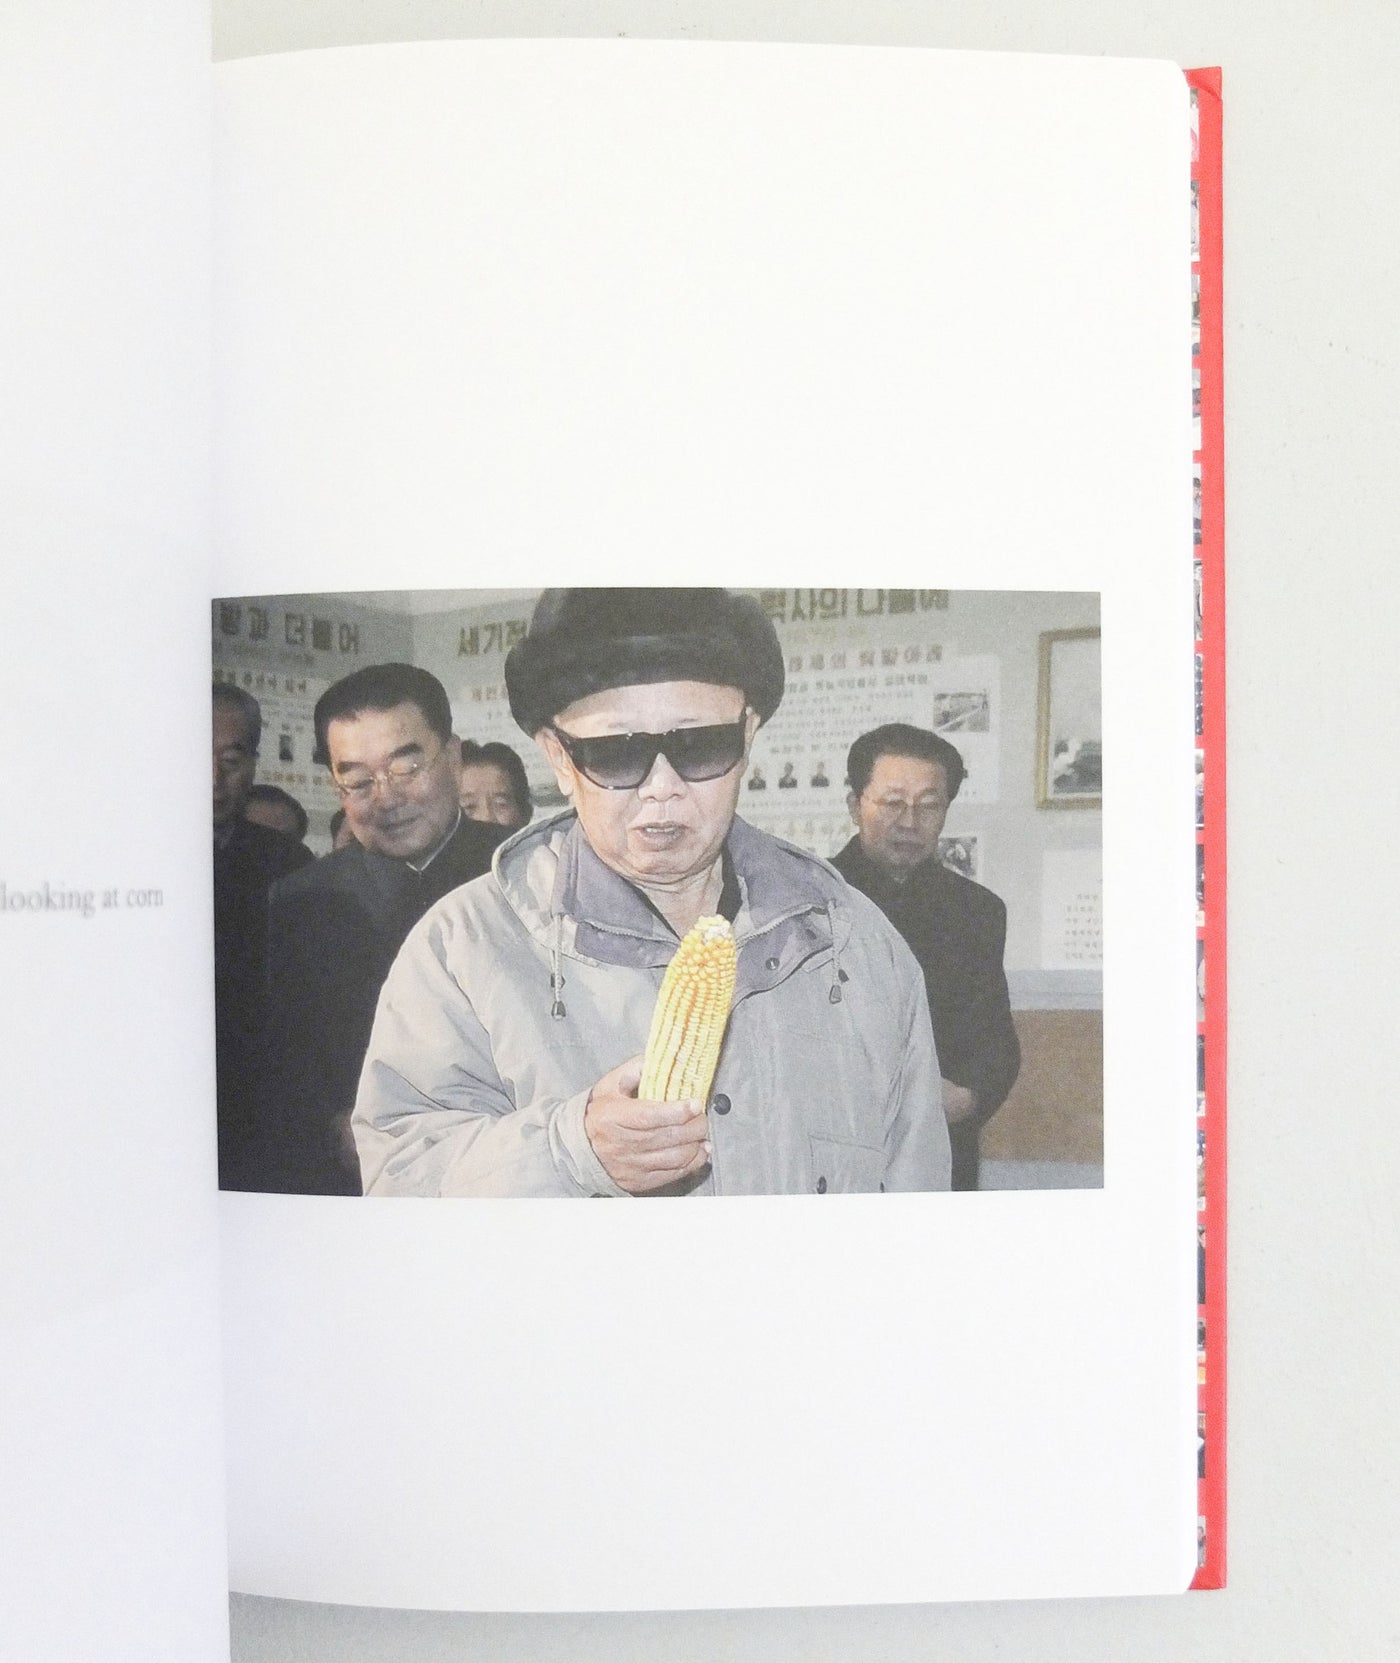 Kim Jong Il Looking at Things by  João Rocha & Marco Bohr}